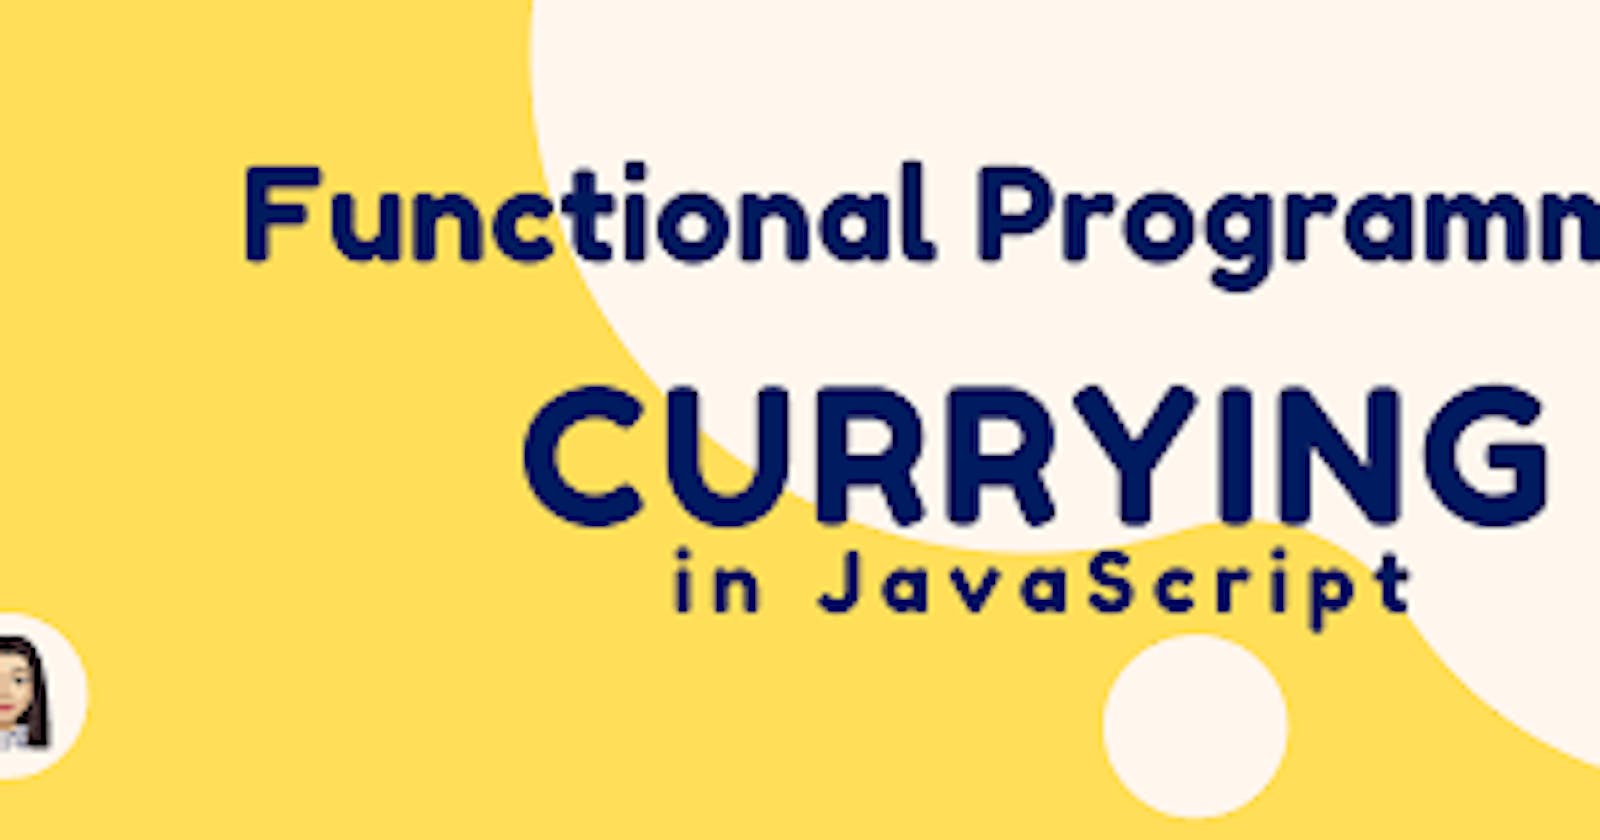 Function Currying in JavaScript